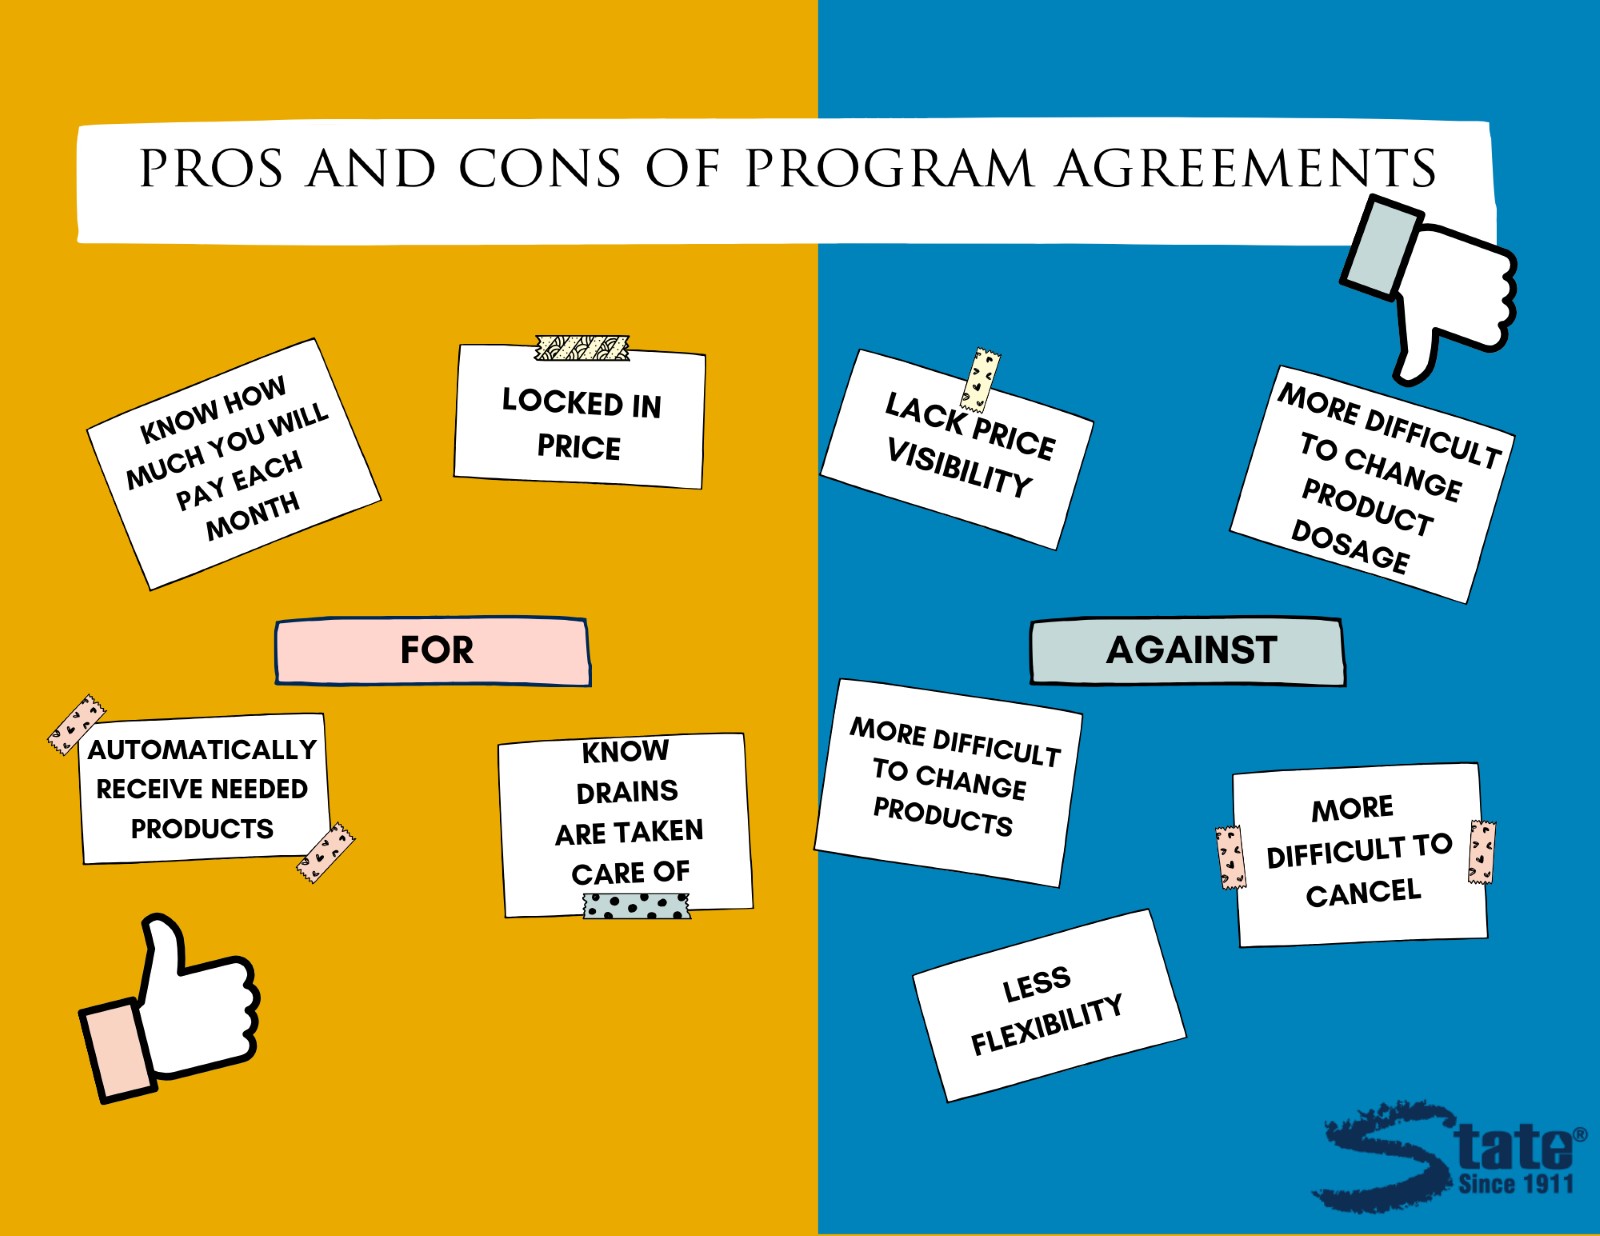  A diagram depicting the pros and cons of program agreements. The pros listed are: how much you will pay each month, that you have a locked in price, that you will automatically receive needed products, and you know your drains are taken care of. The cons listed are: lack of price visibility, that it is more difficult to change products, that it is more difficult to change product dosage, that there is less flexibility, and that it is more difficult to cancel.